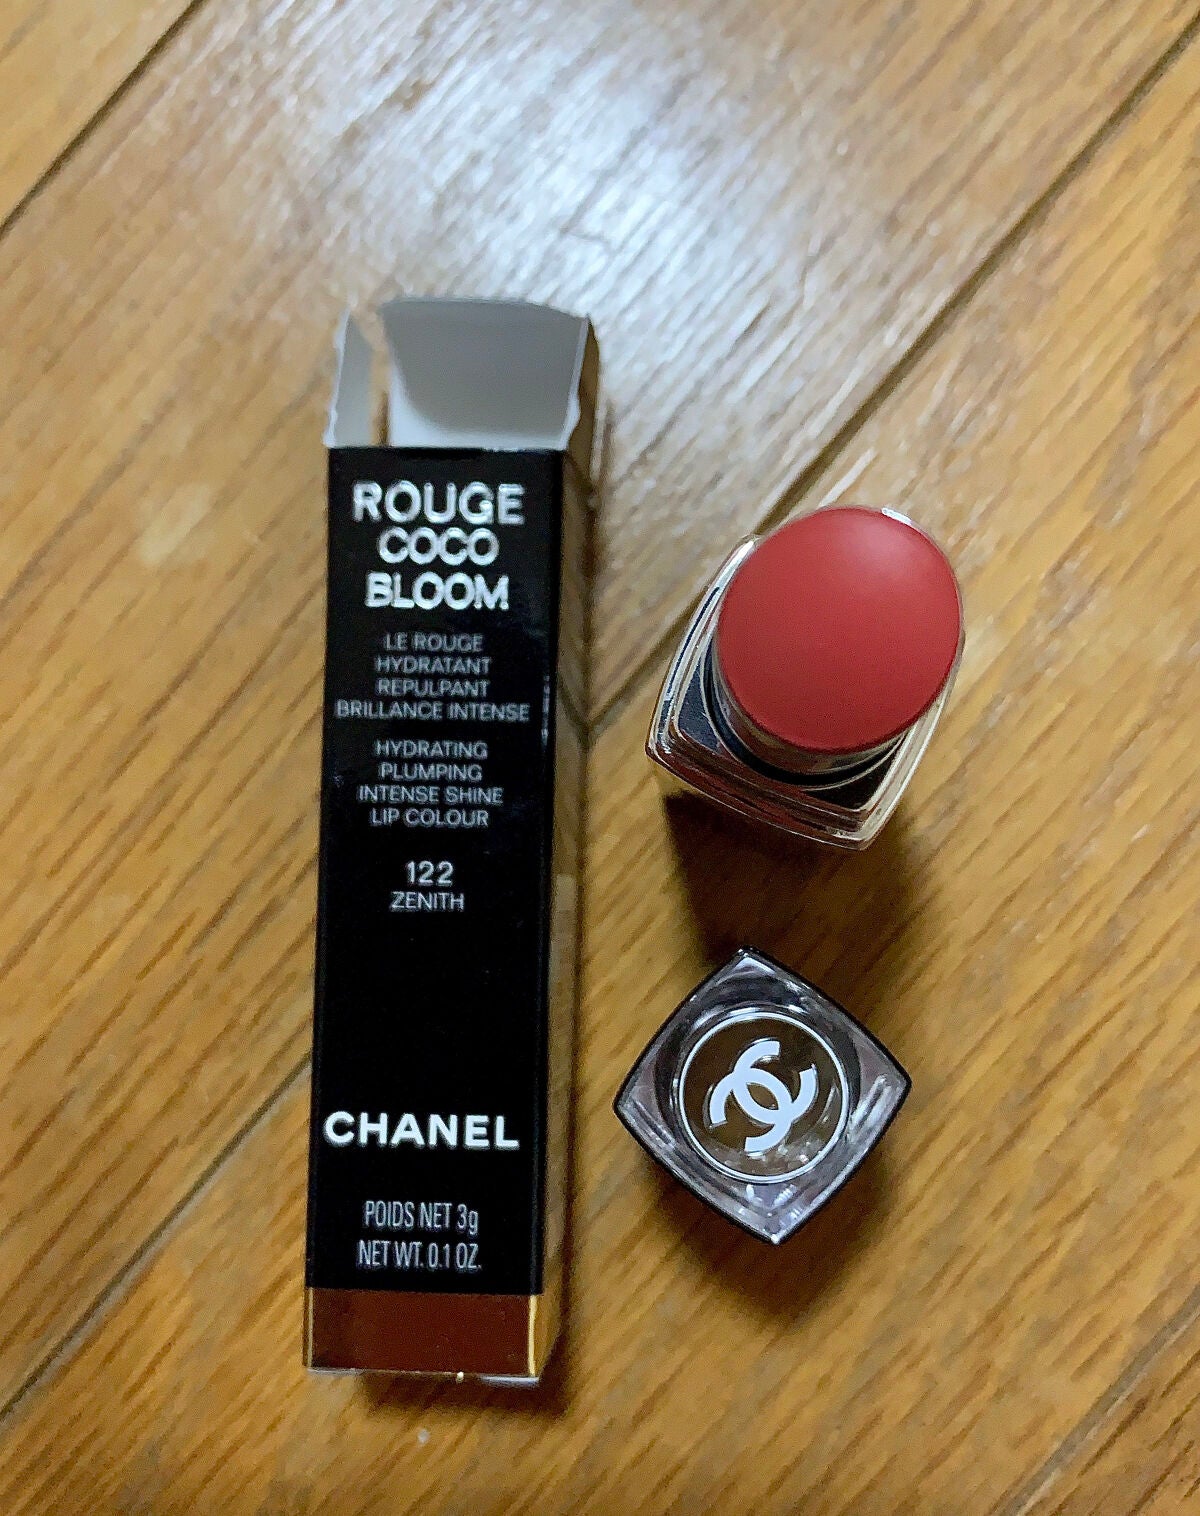 Chanel Rouge Coco Bloom Hydrating Plumping Intense Shine Lip Colour - 122  Zenith 3g/0.1oz